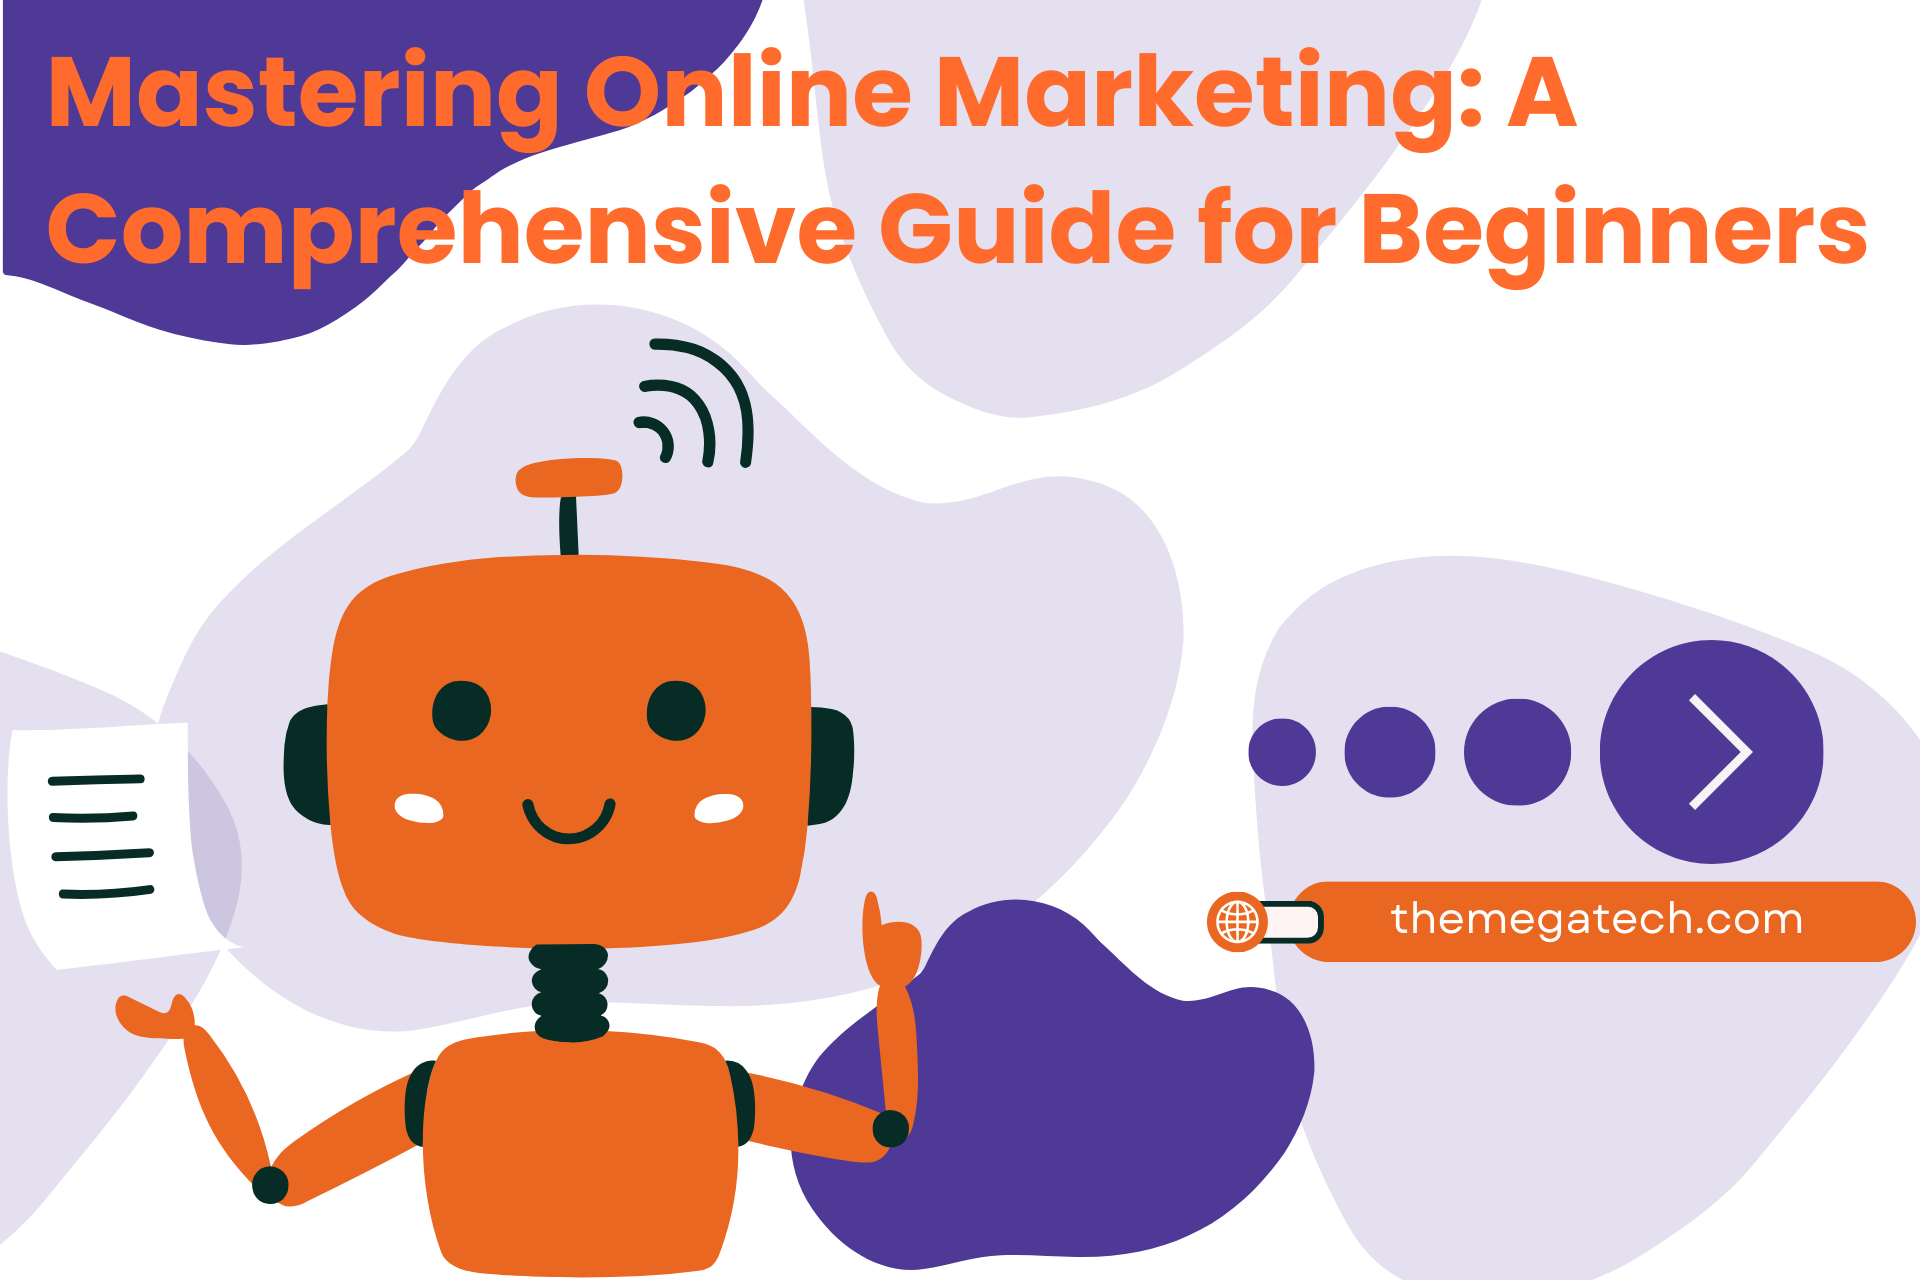 Mastering Online Marketing: A Comprehensive Guide for Beginners